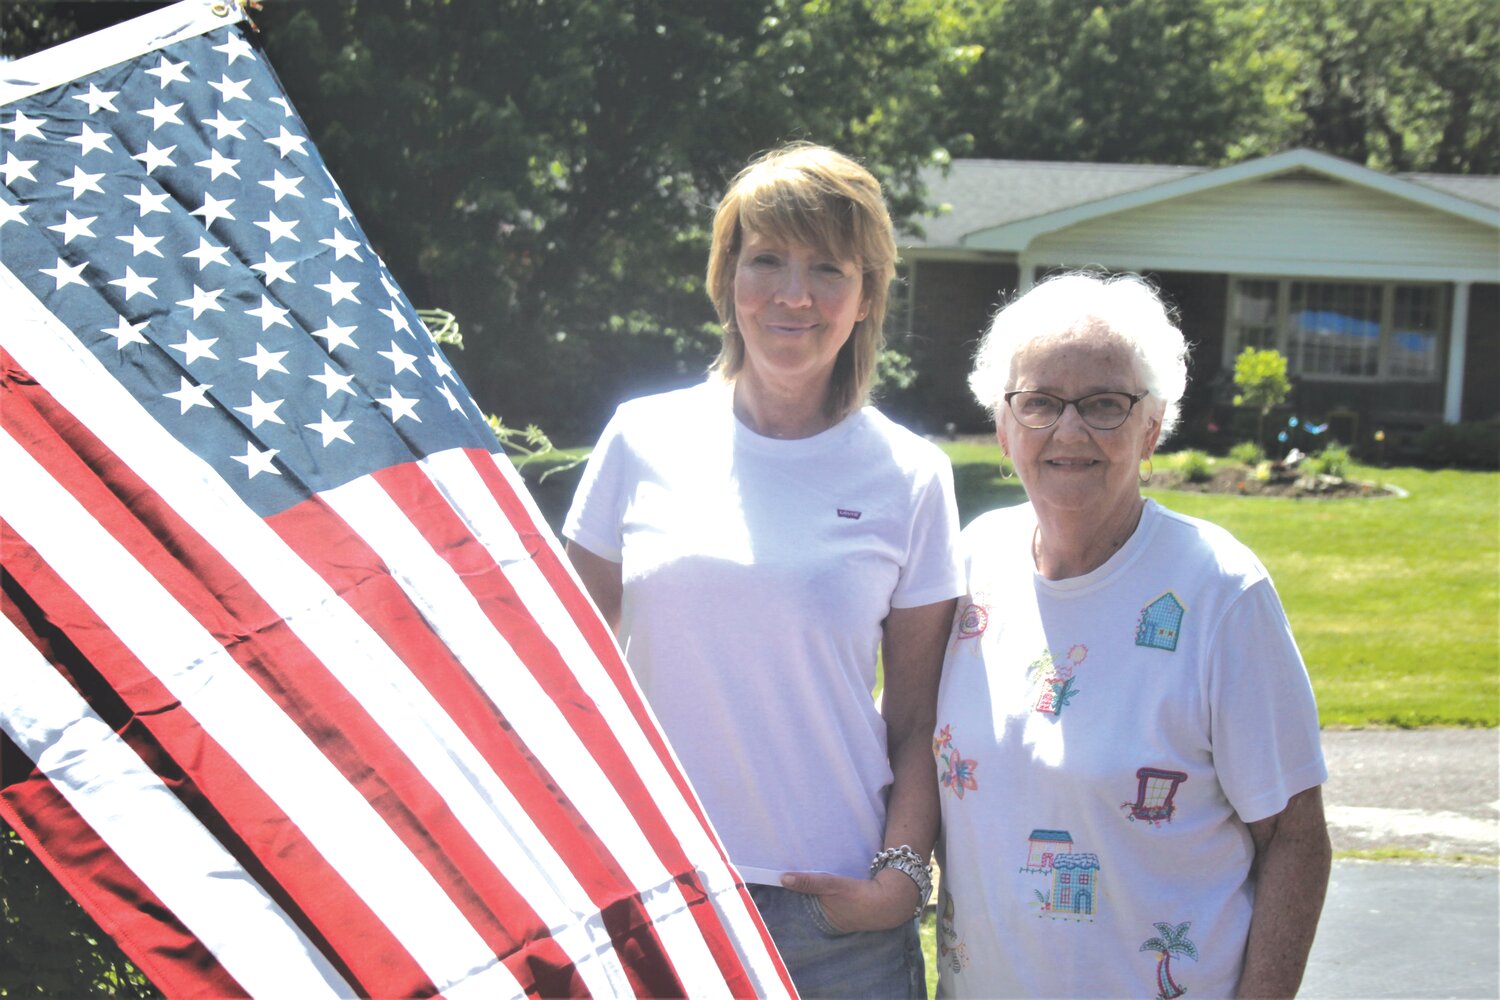 Susanne Enders, left, poses with cousin Barbara Messinger and the American flag on May 22 at Messinger’s residence in High Hill. Enders, who is from Germany, made her first visit to the United States.